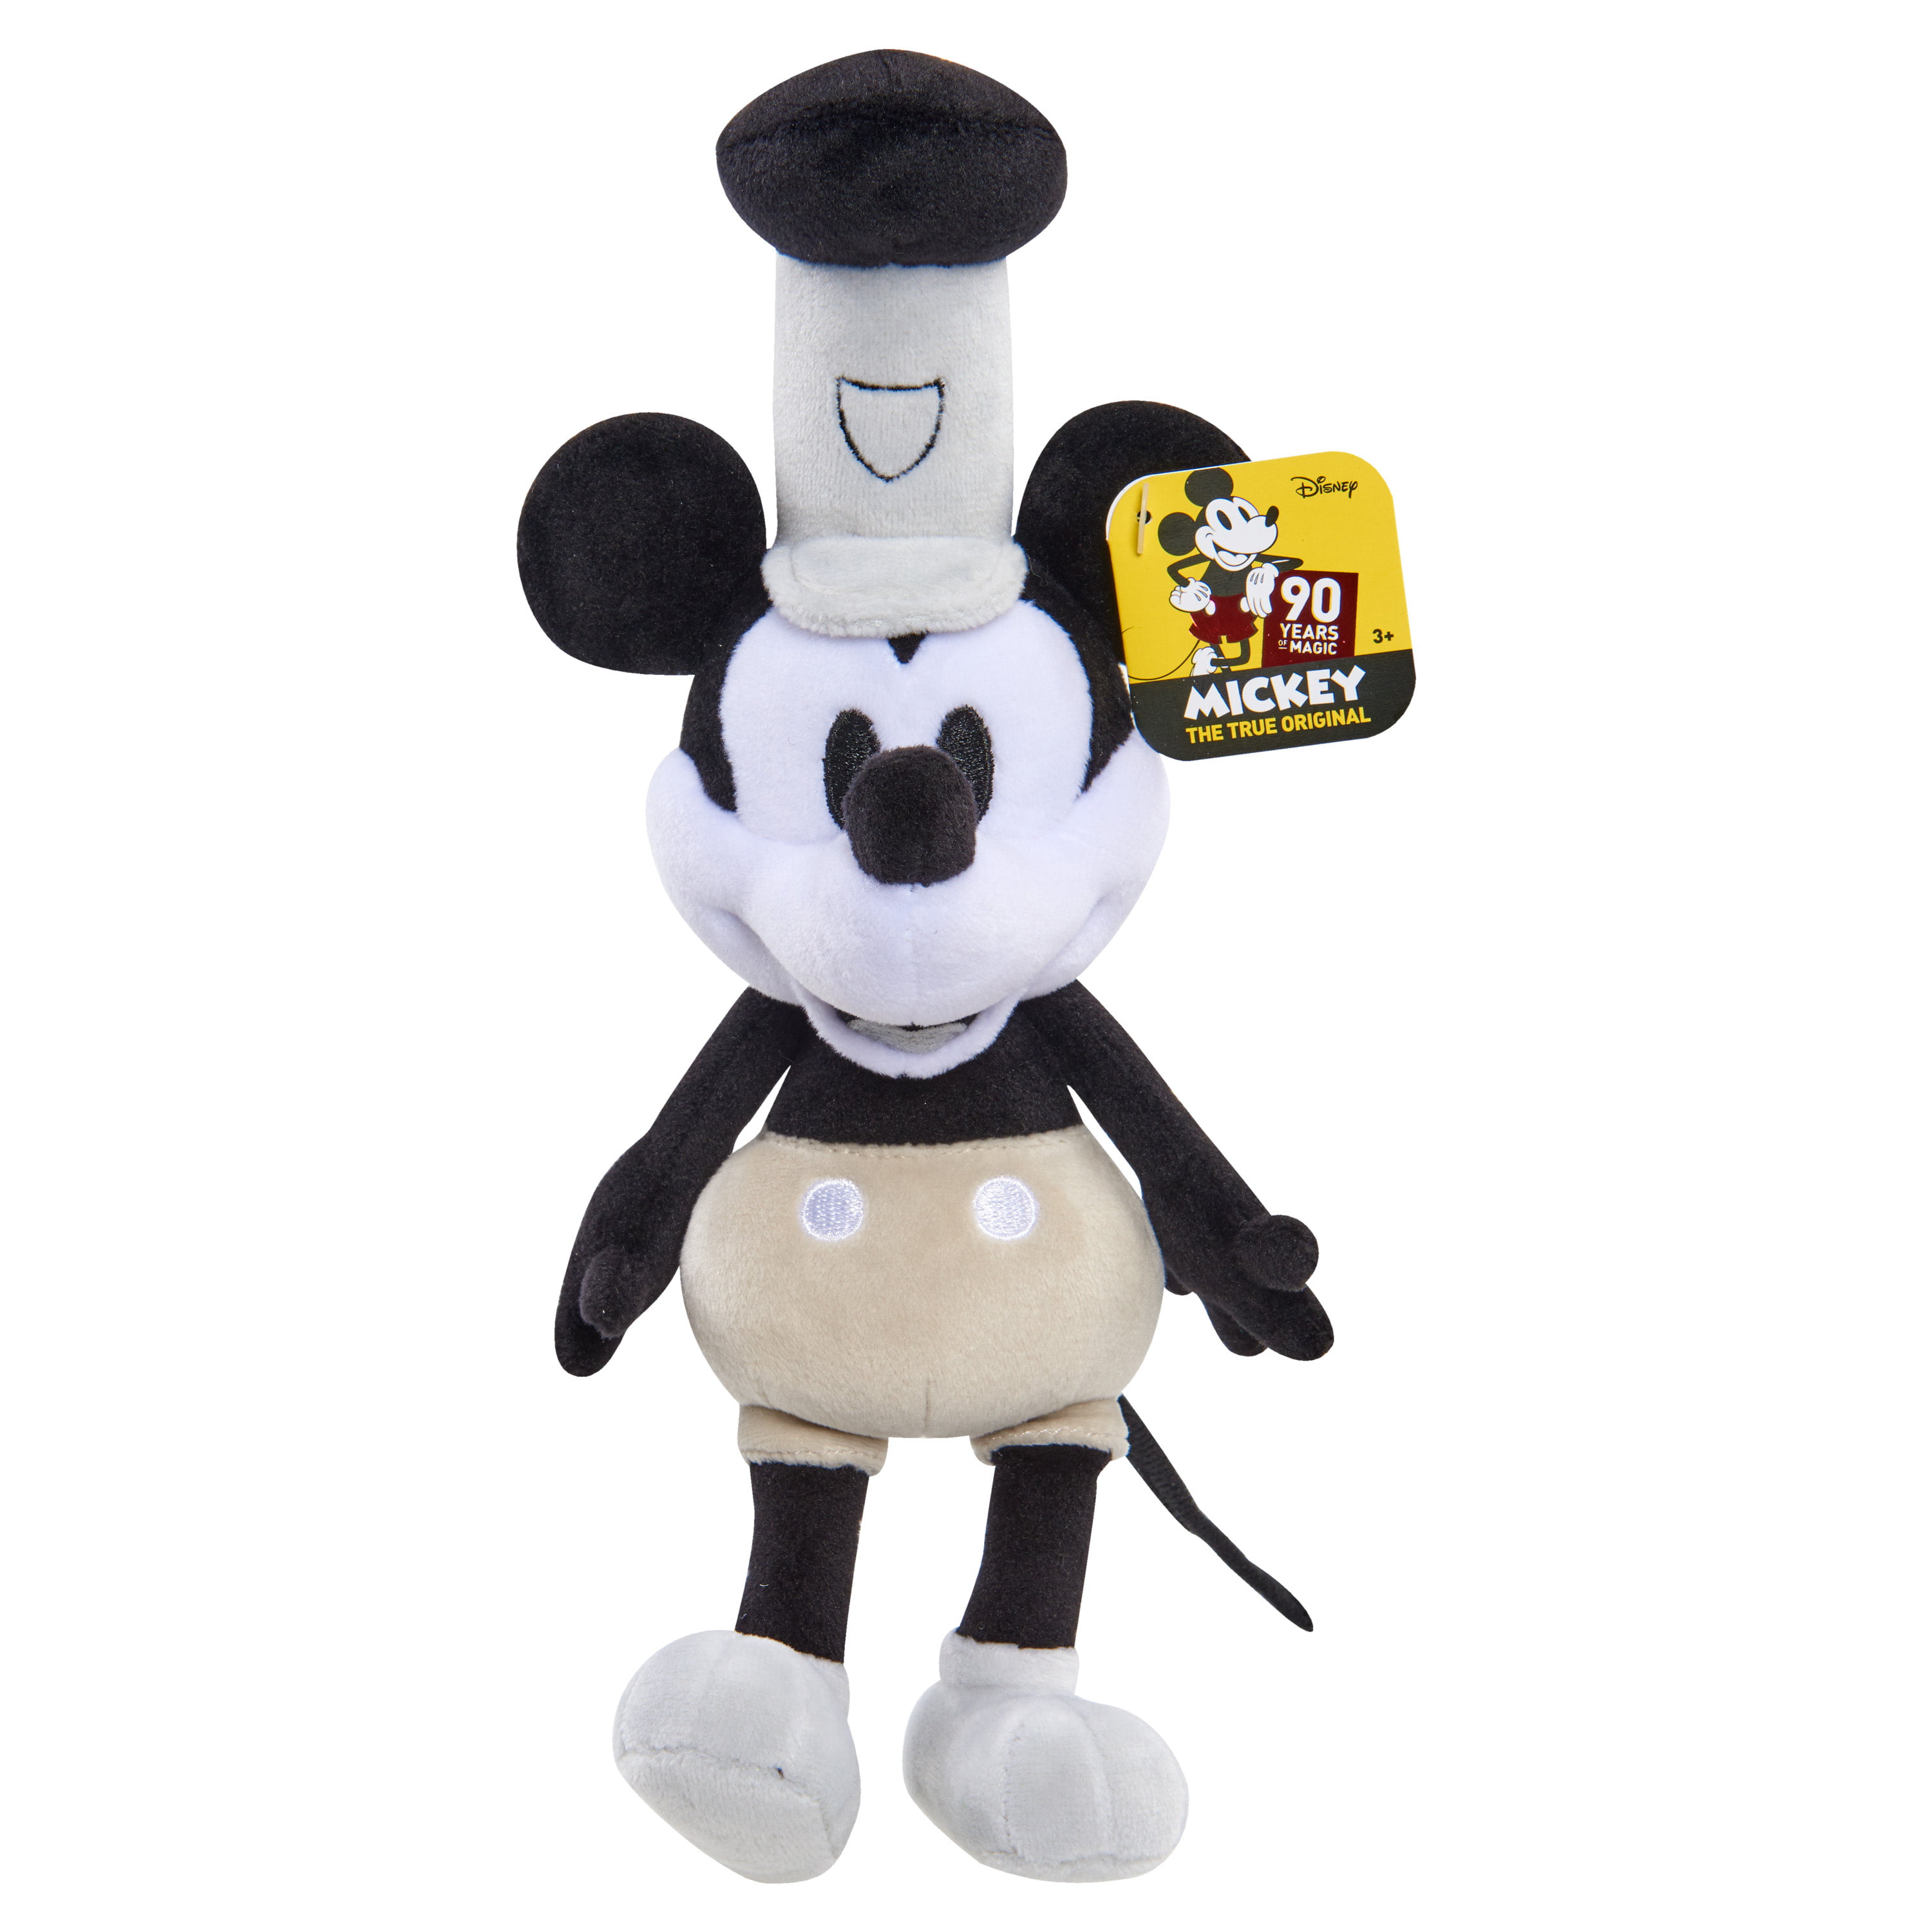 steamboat willie plush toy